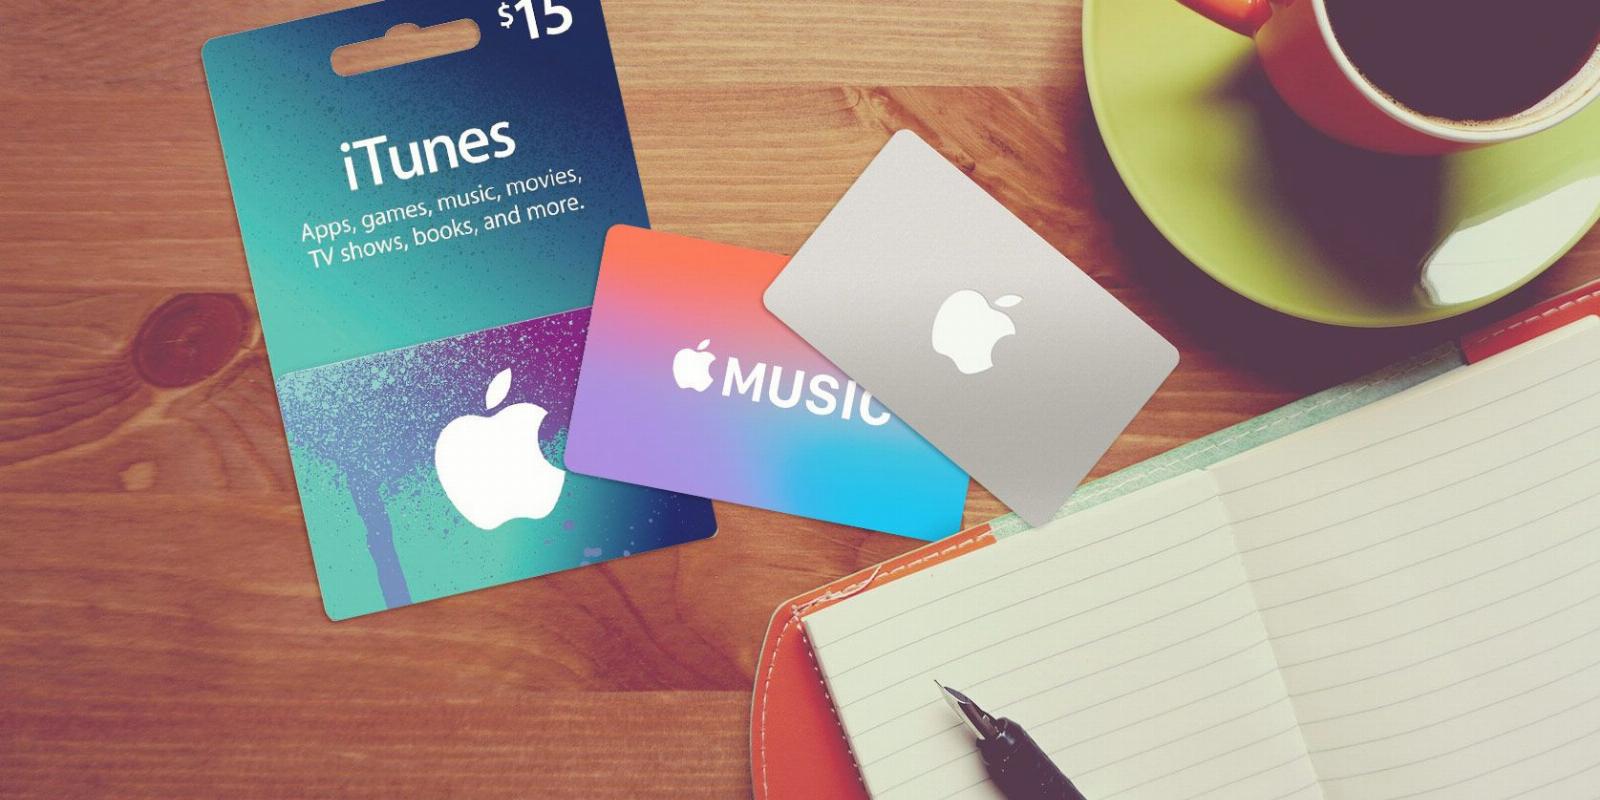 Apple Gift Card vs. App Store Gift Card vs. Apple Store Gift Card: Which One Should You Buy?